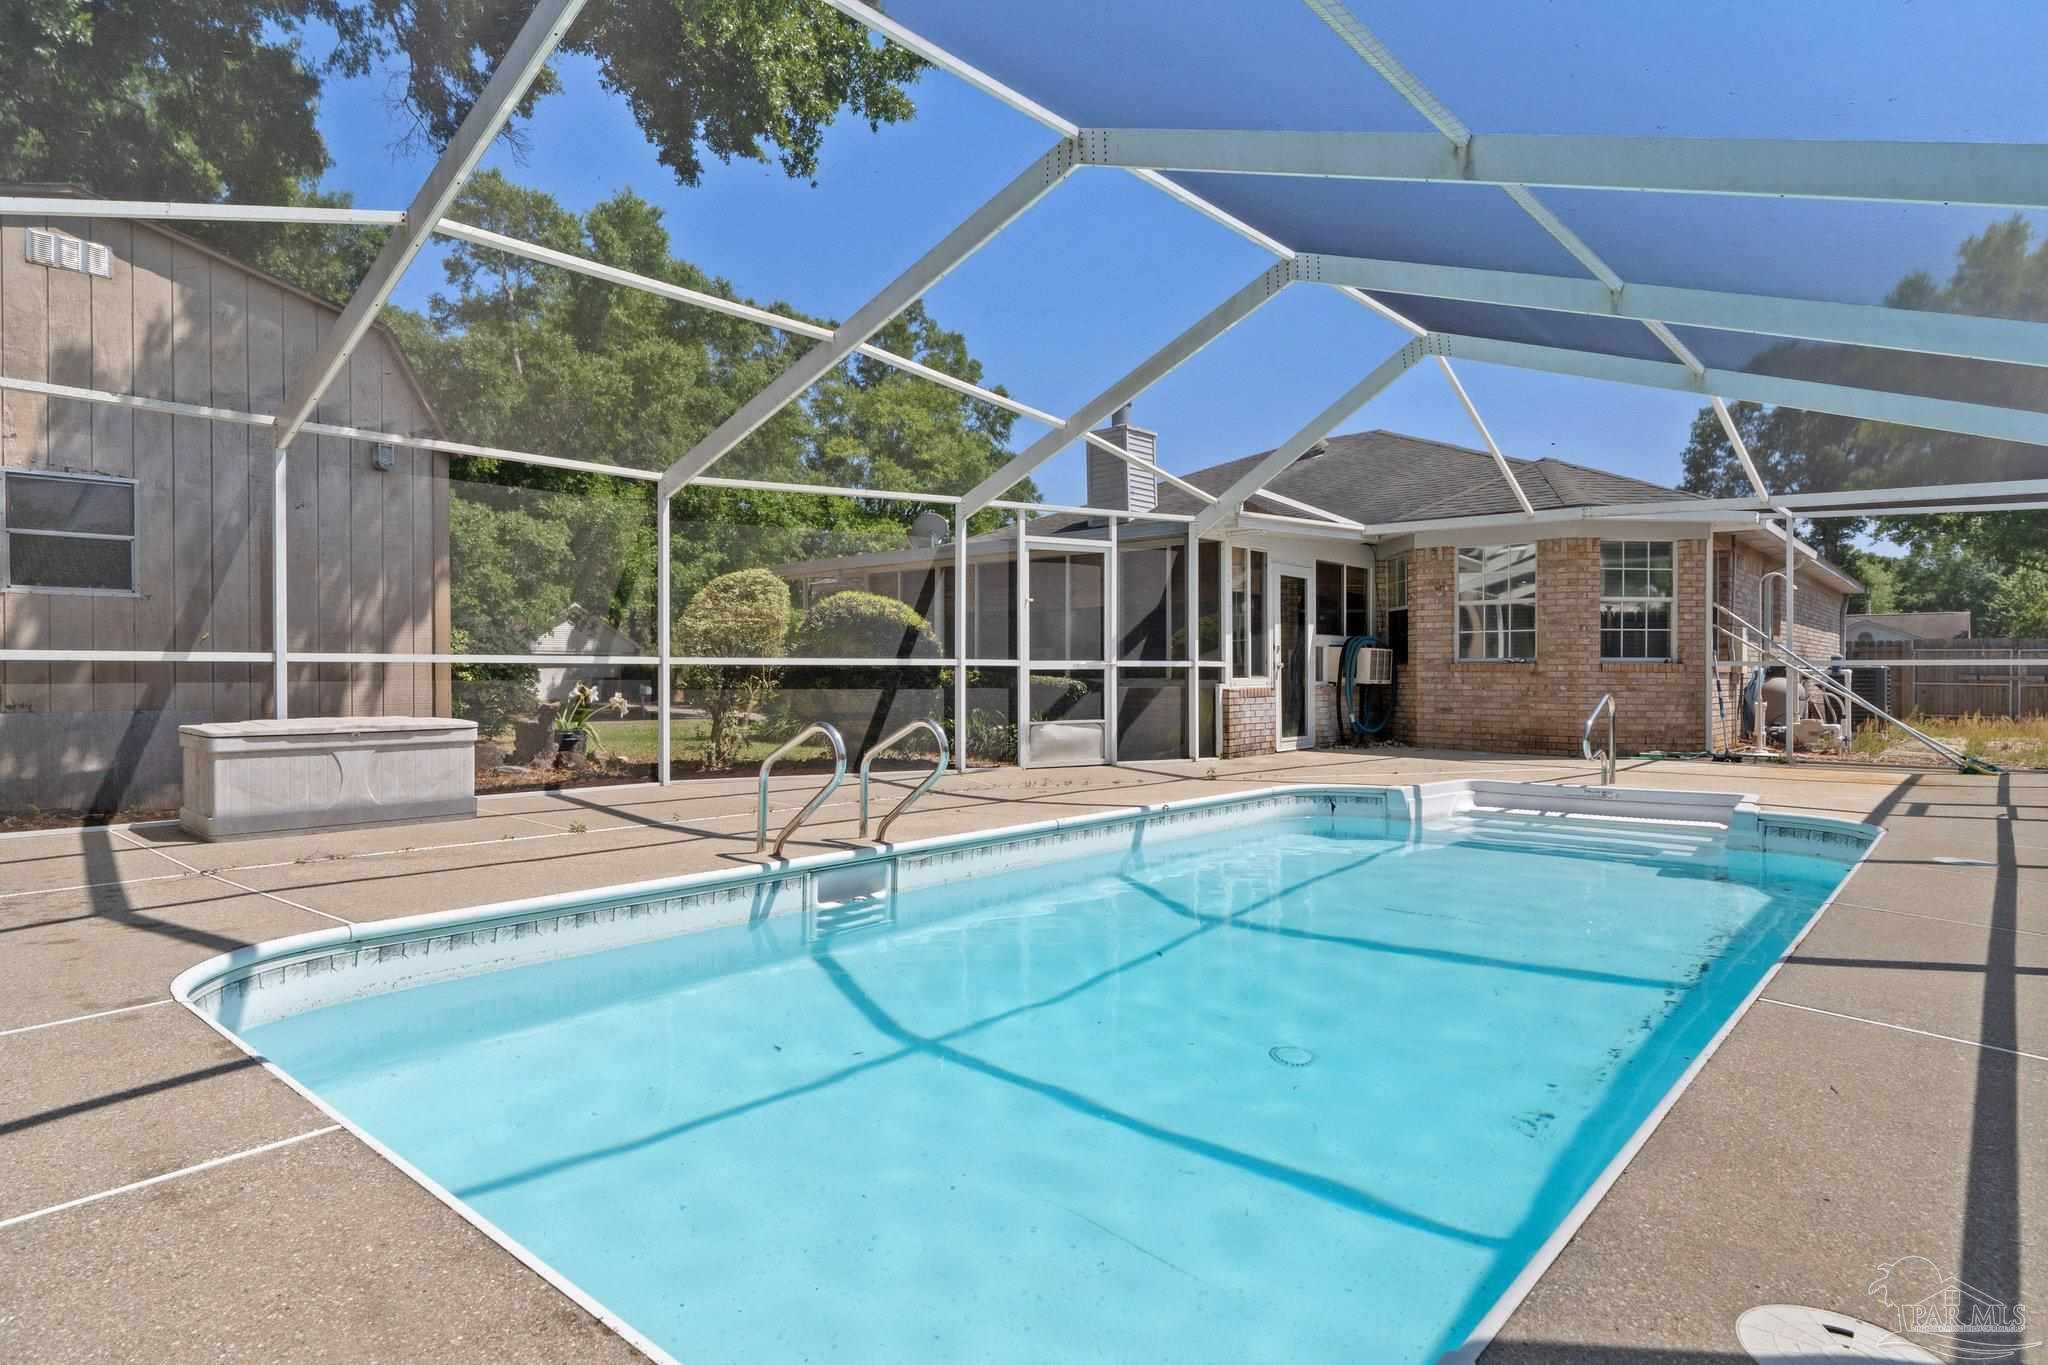 a view of a backyard with a swimming pool and furniture